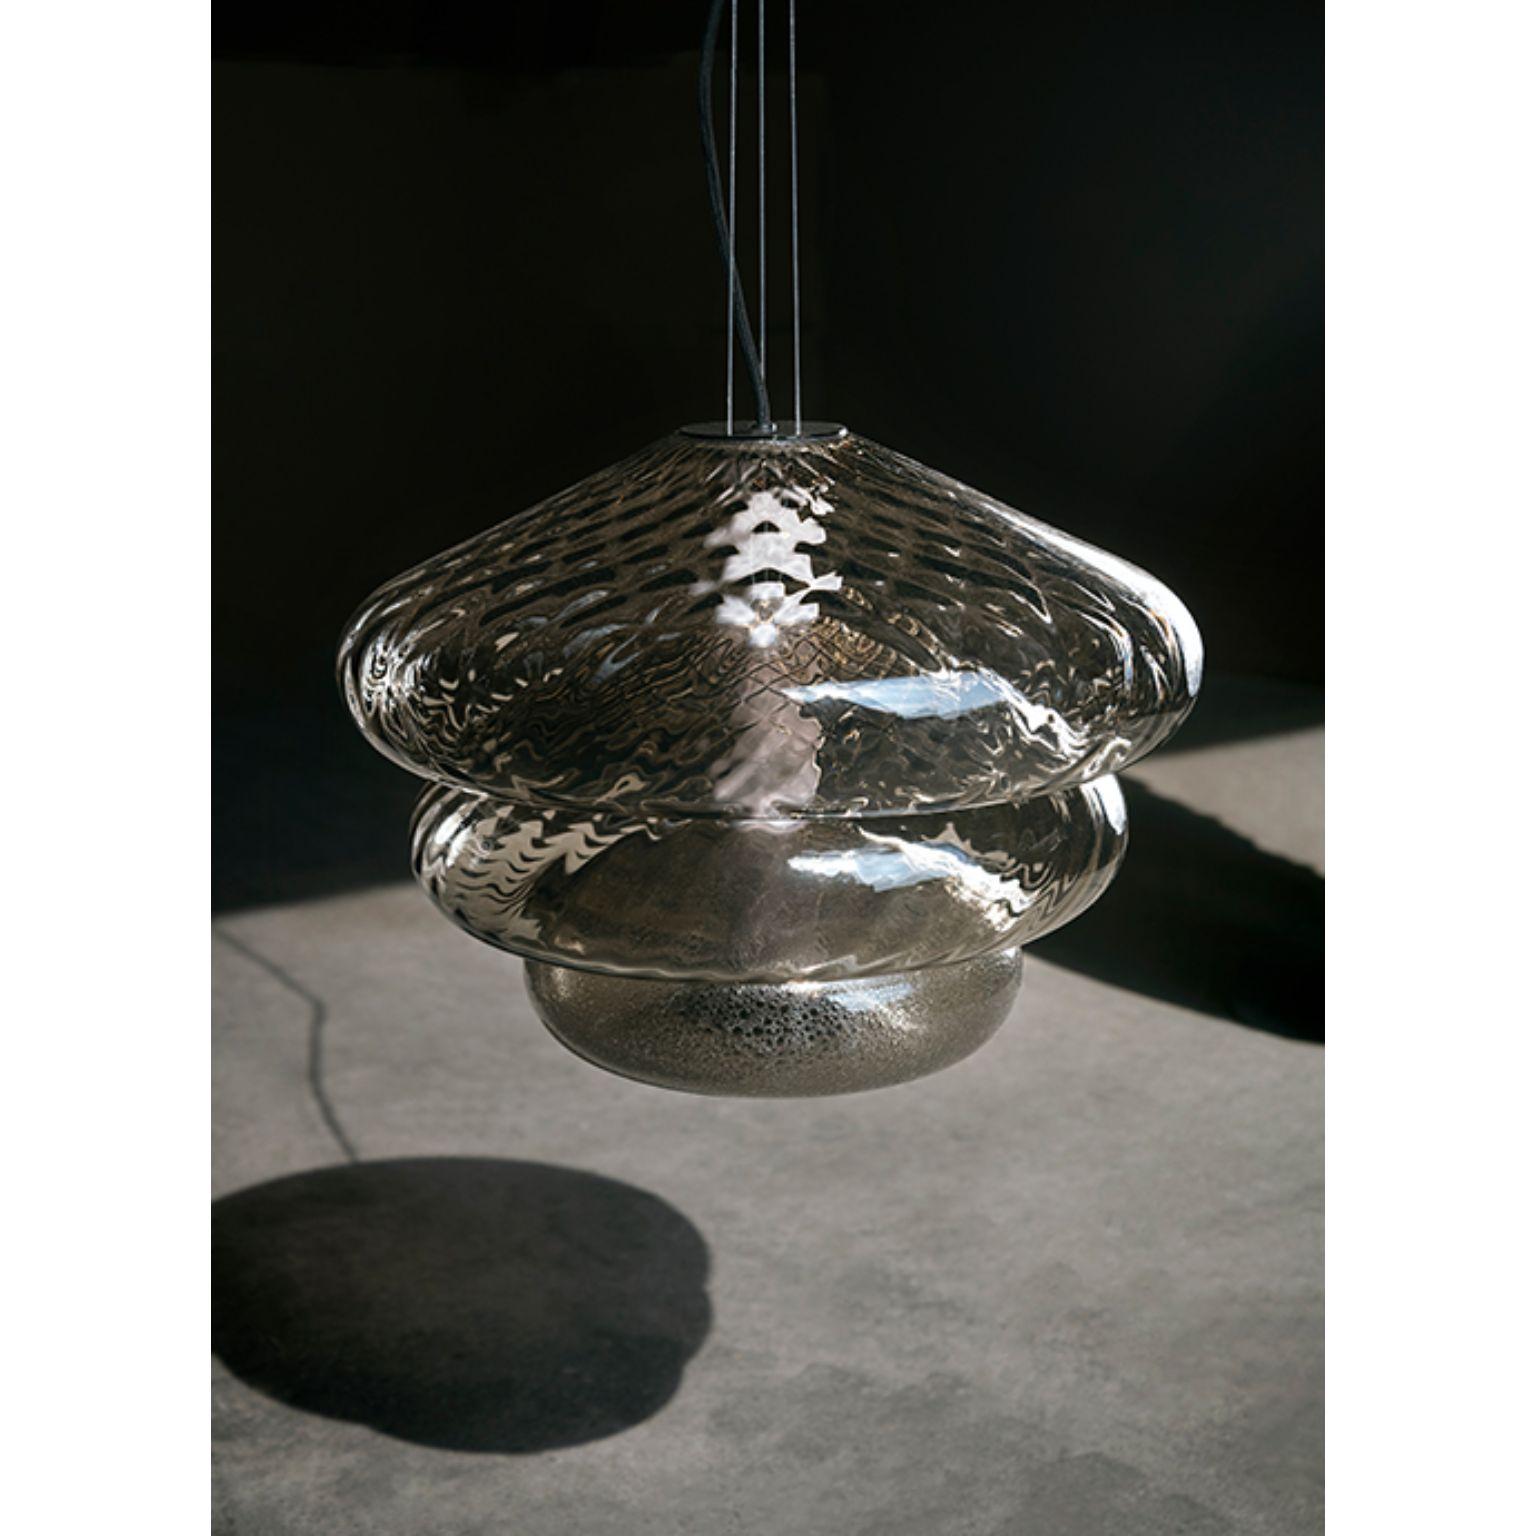 Tima pendant light by Luca Nichetto
Materials: Shade: Clear/Grigio Kaiser/Amber mouth blown glass
 Structure: Bronze satin, black chrome and glass
Dimensions: W 44.2 x D 44.2 x H 34 cm

Customization available.

In the roundness of their